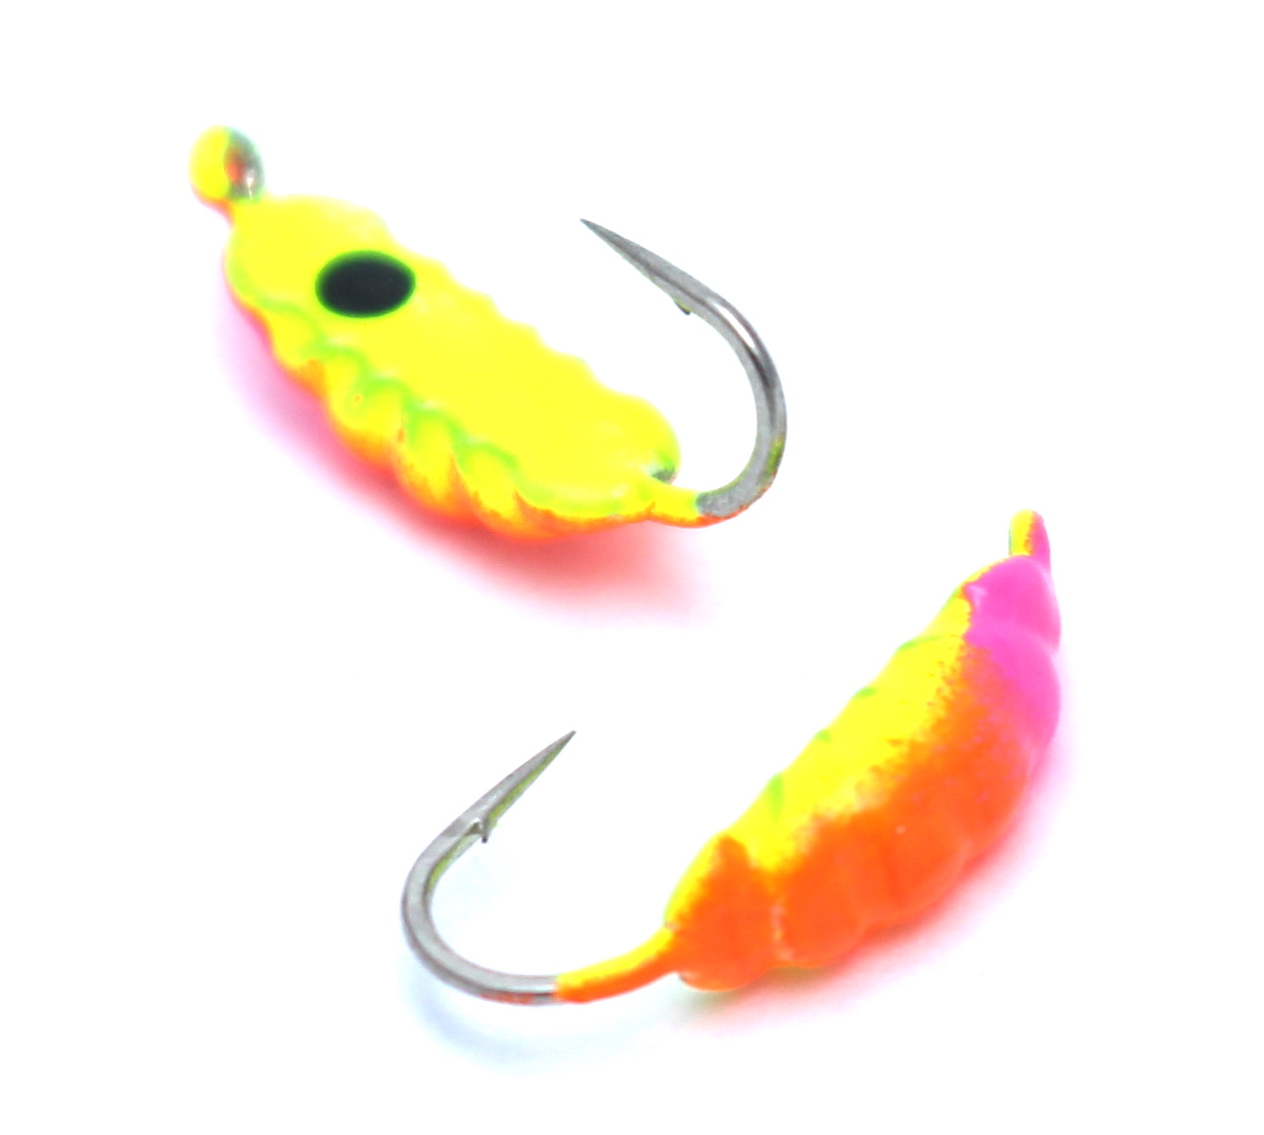 Tungsten Scud Missile - Widow Maker Lures